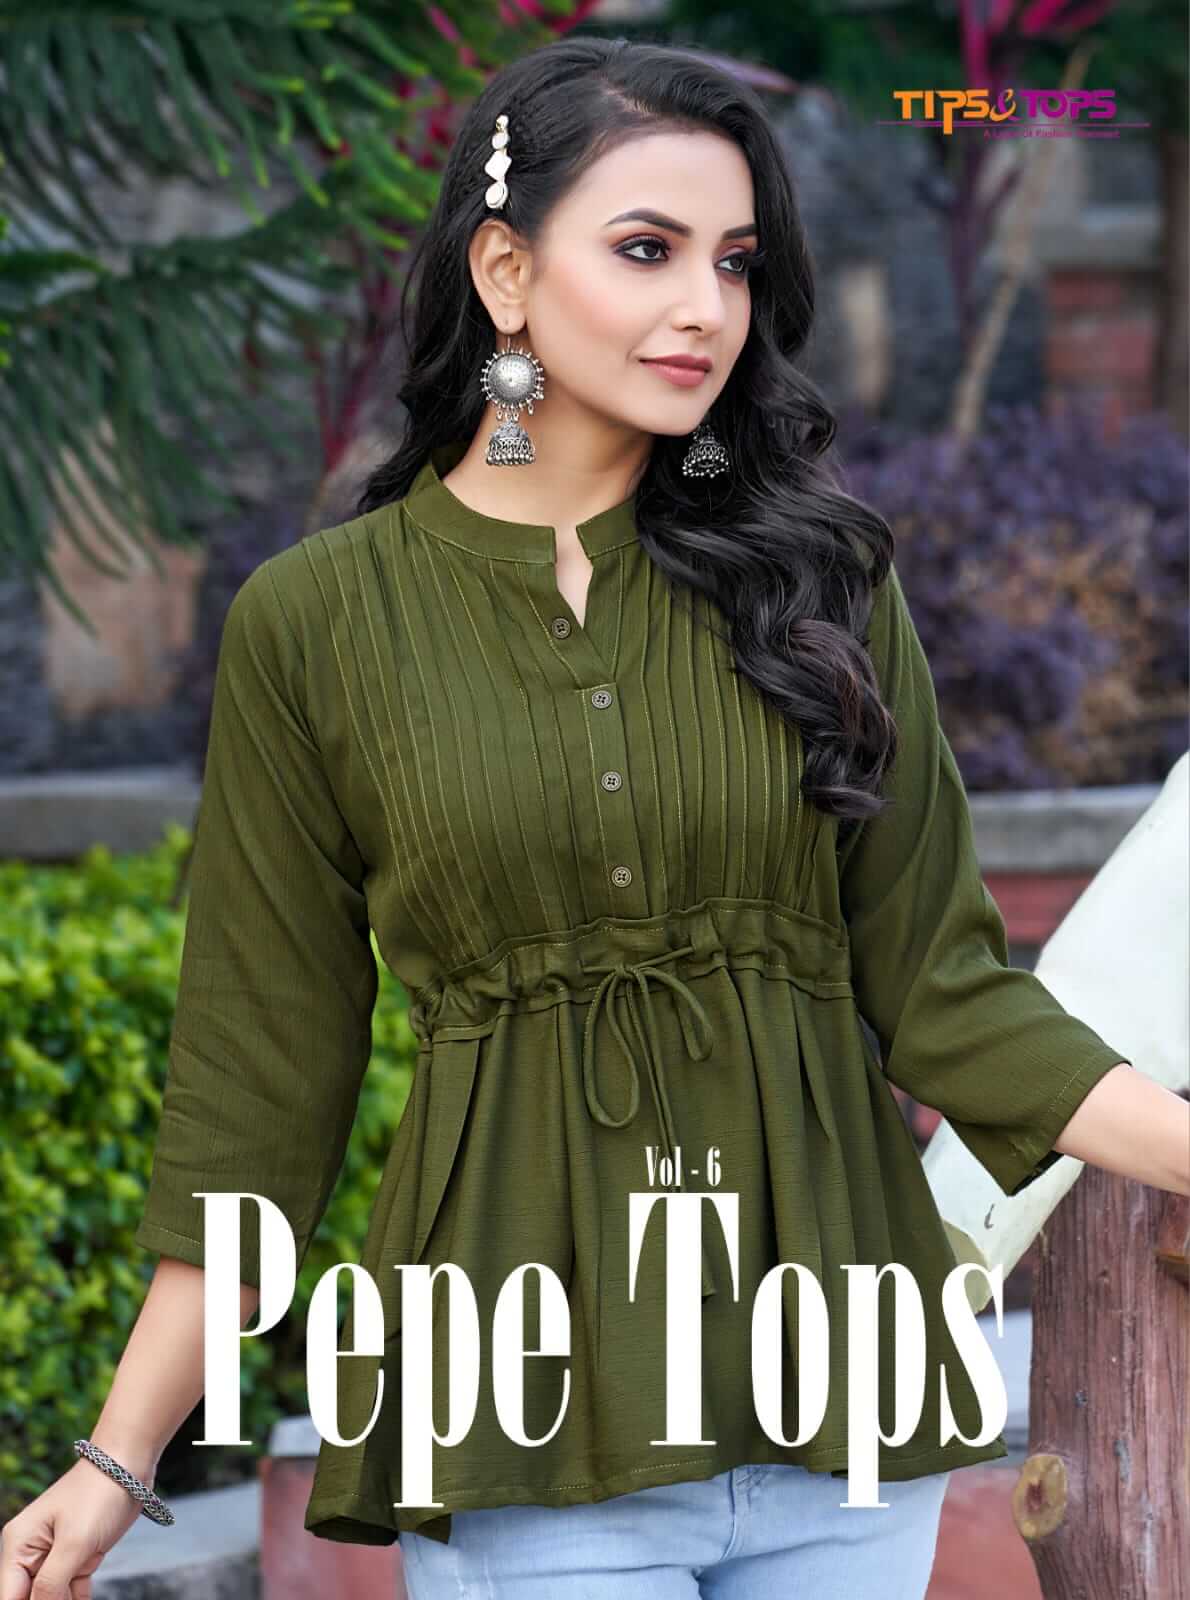 Tips Tops Pepe Tops Vol 6 Ladies Tops Catalog collection 2